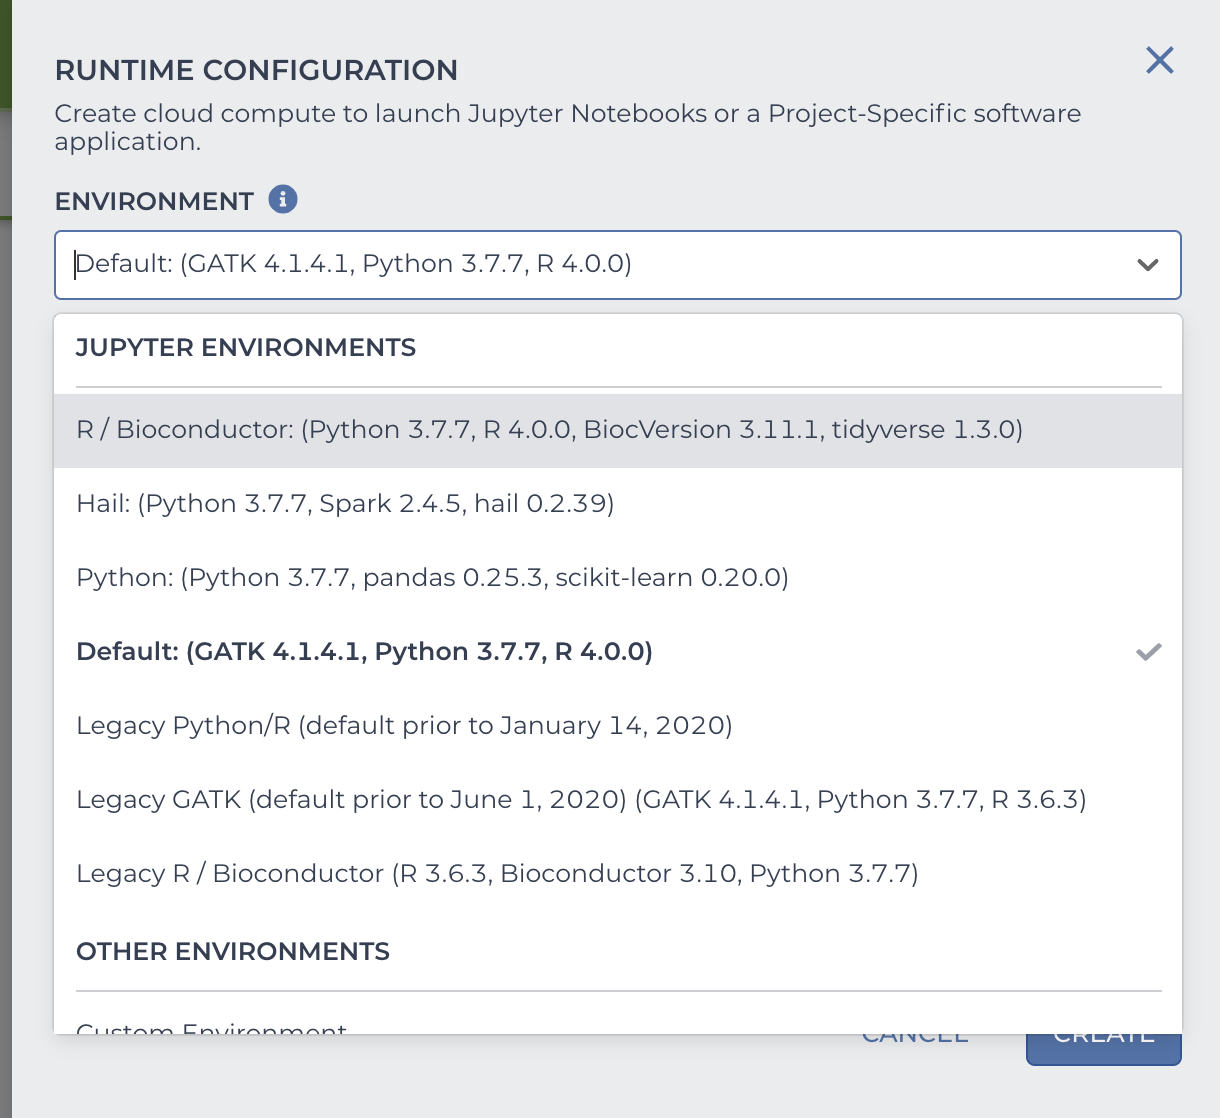 Screenshot of runtime section in the Cloud Environment configuration form with the preconfigured bioconductor selected from the Jupyter Environment dropdown.